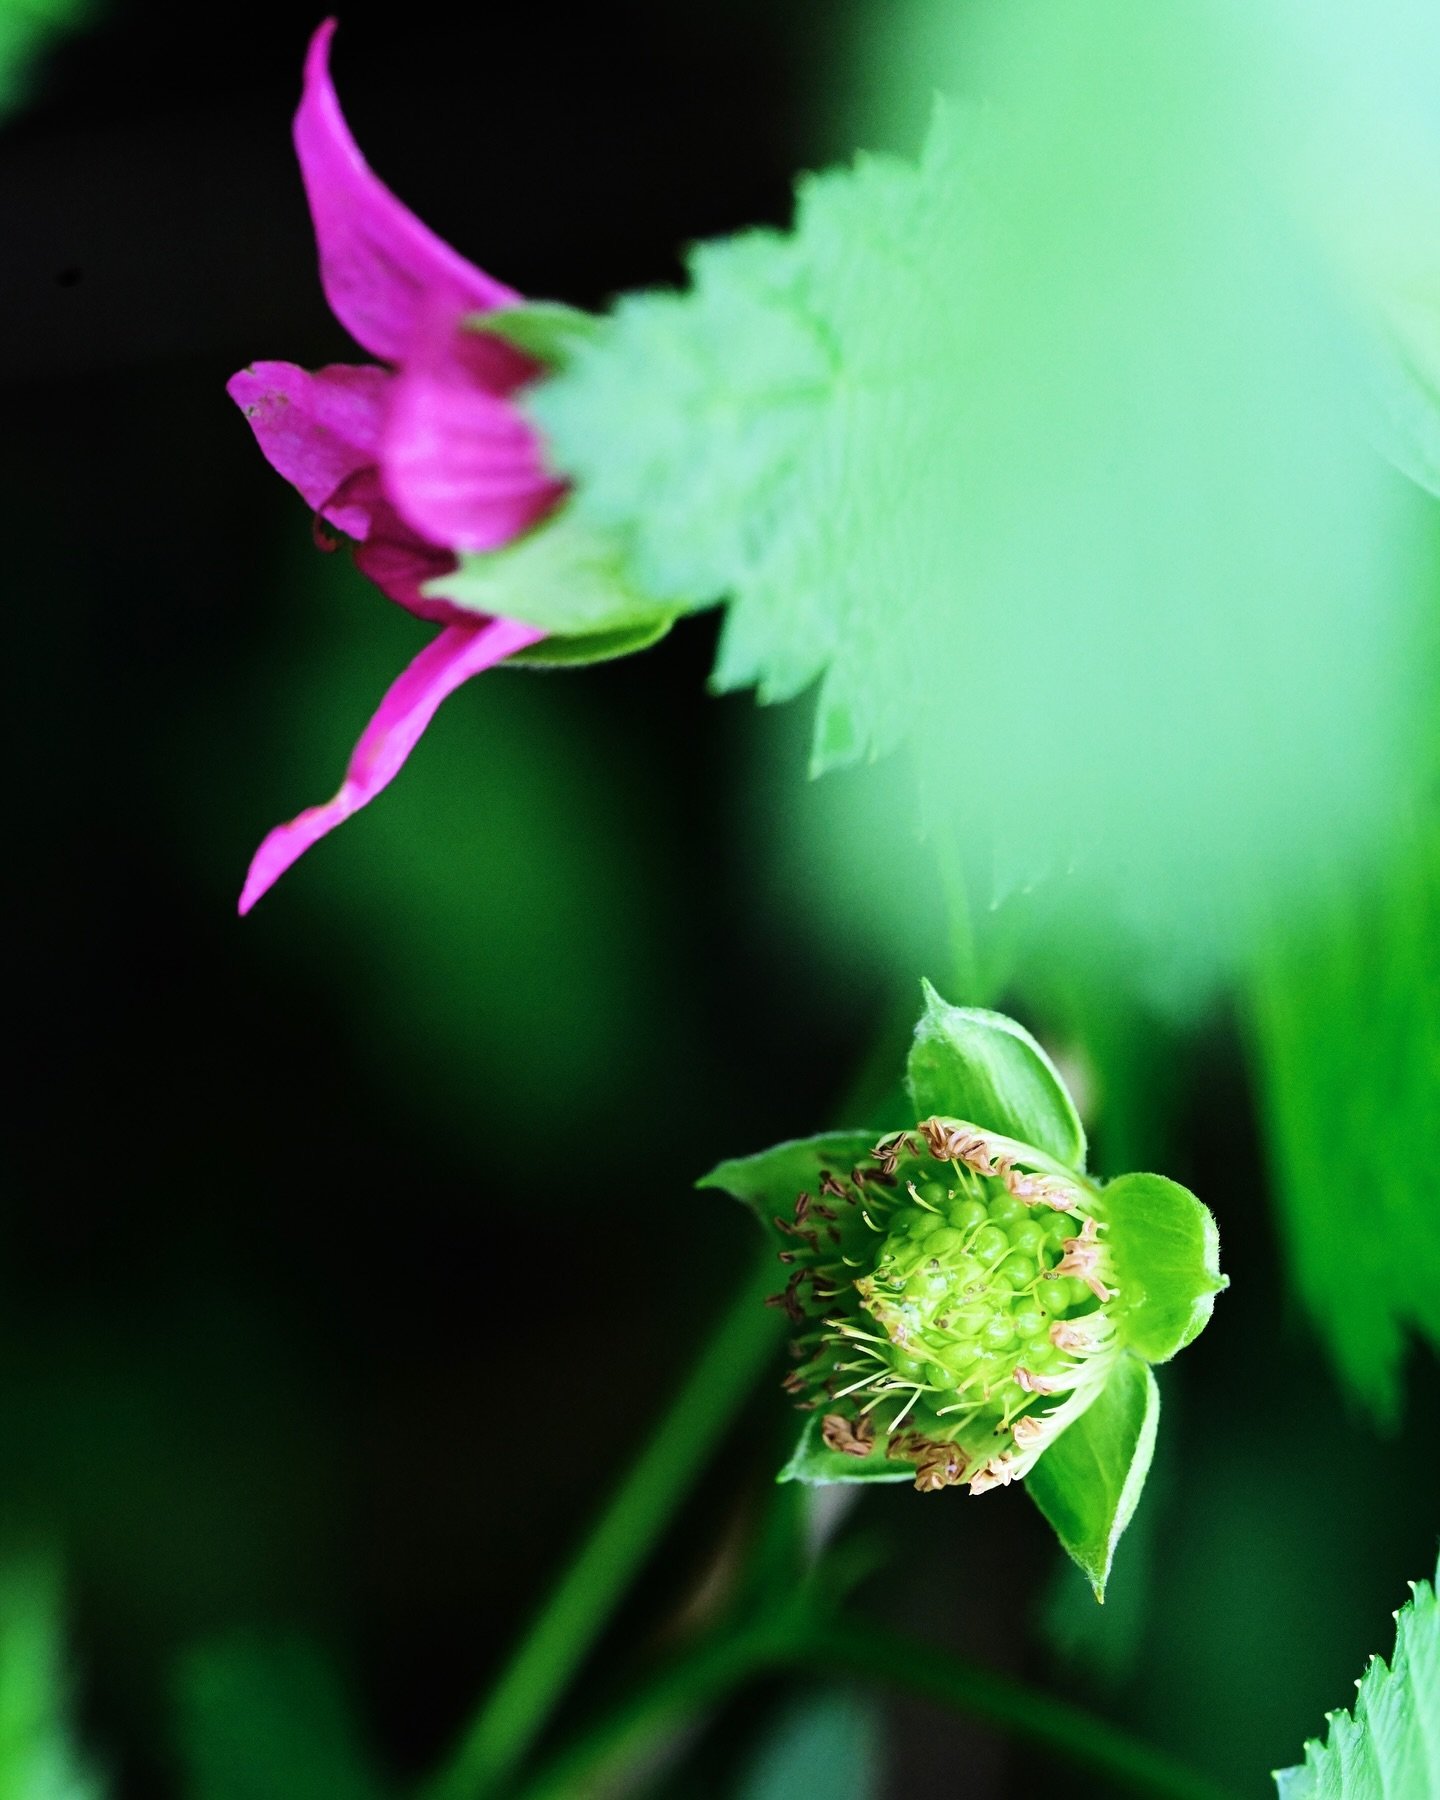 A salmonberry emerging. 

During my permaculture certification I dove deep into the history and cultural significance of first foods - native plants that were the dietary foundation of Native American tribes. For many tribes of the Pacific Northwest,